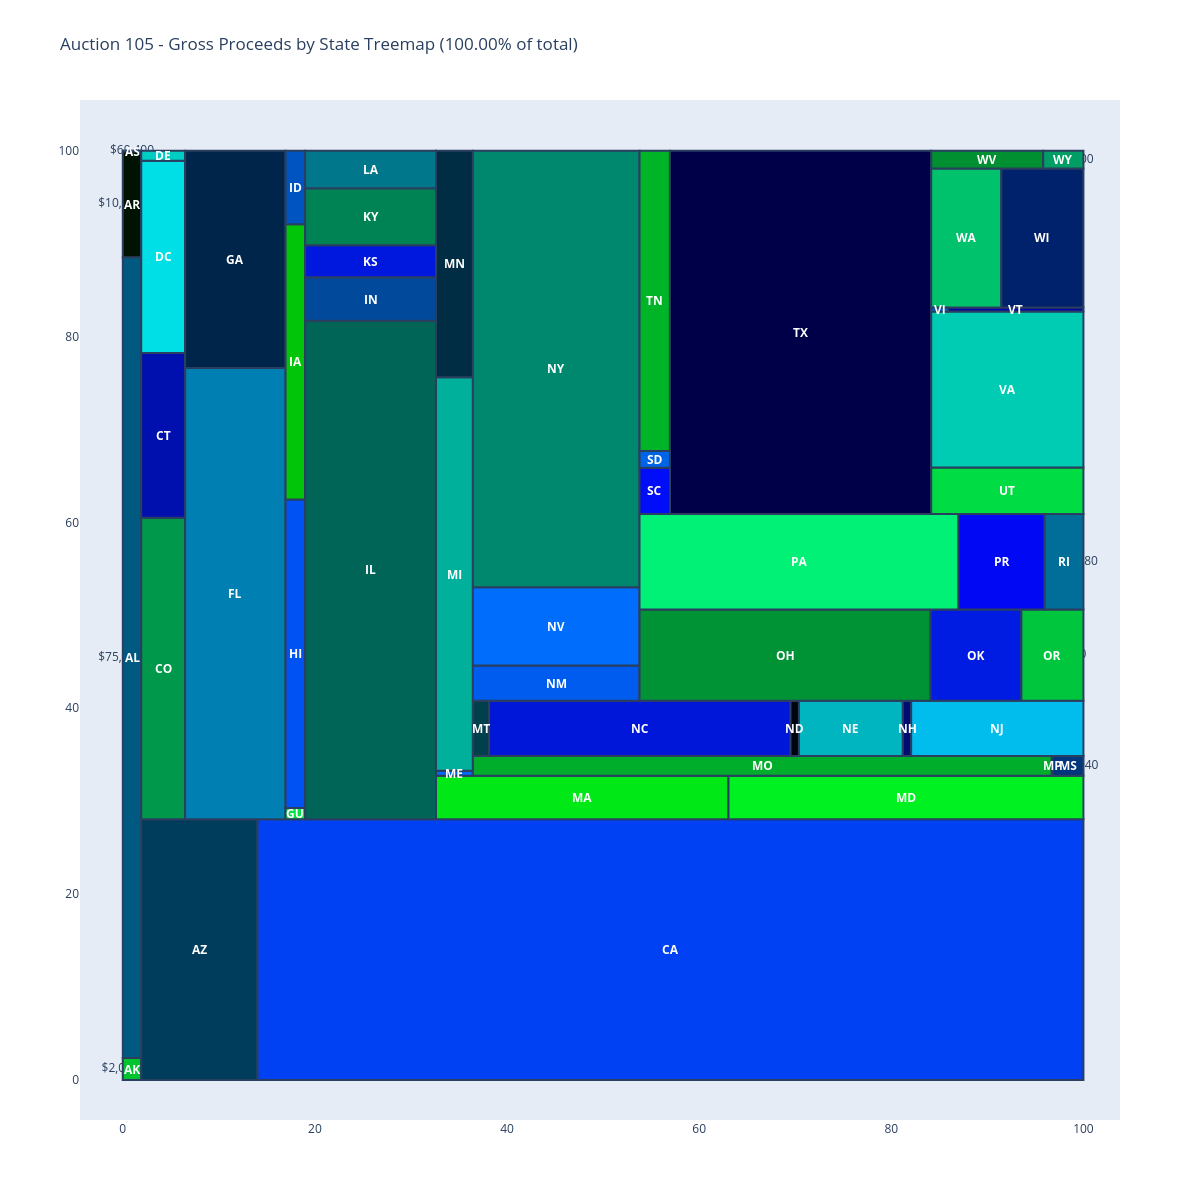 Auction 105 - Gross Proceeds by State Treemap (100.00% of total) |  made by Sashajavid | plotly